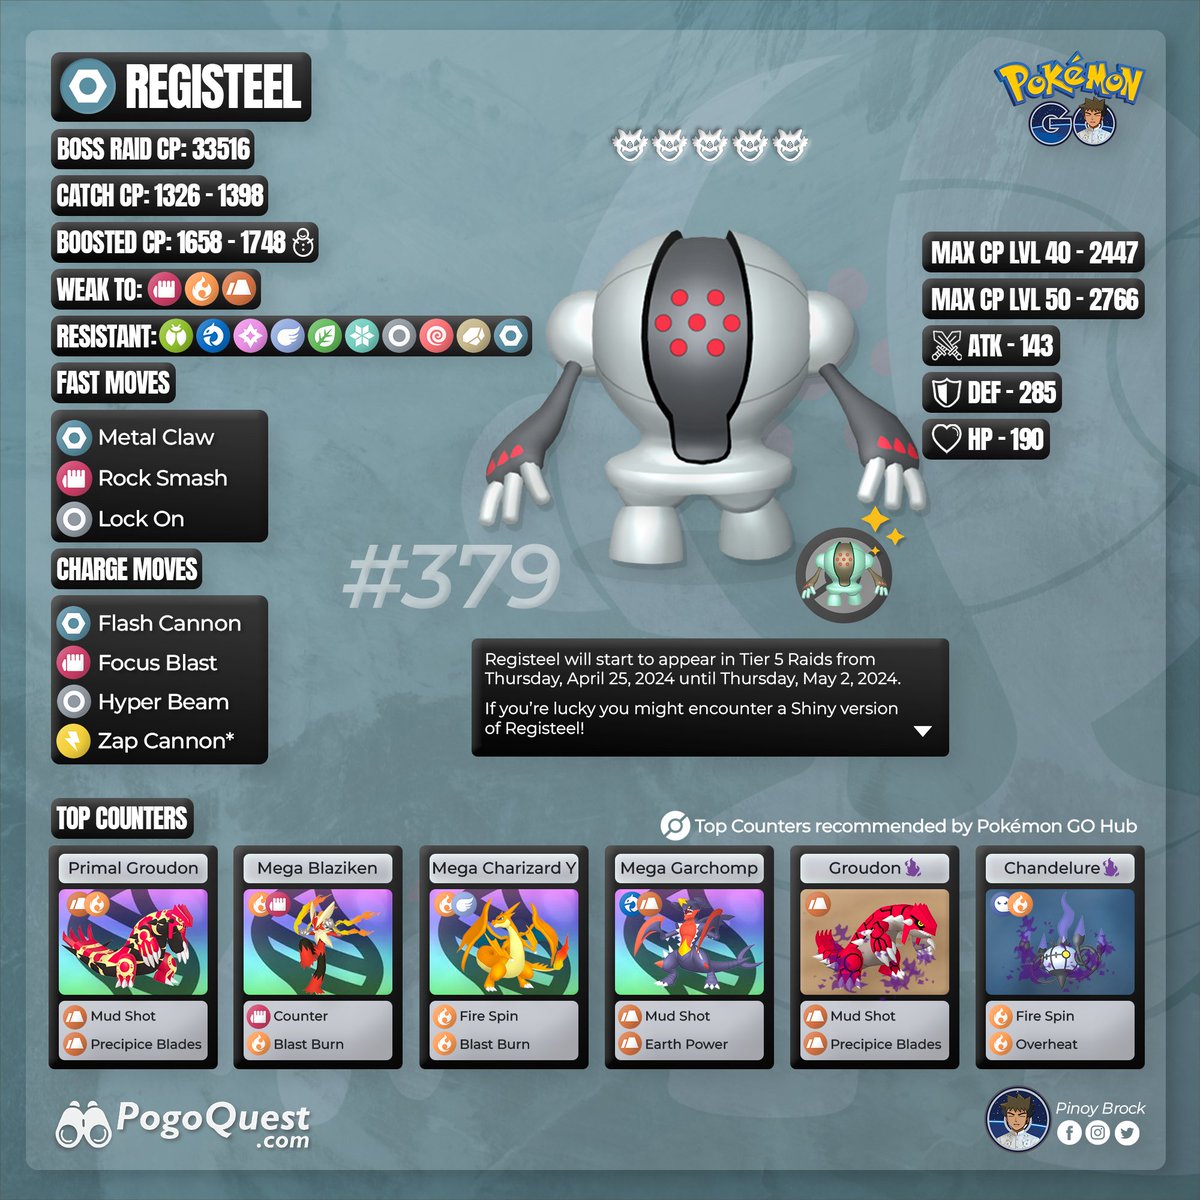 Legendary Pokémon Raid: Registeel

Registeel will appear in 5-star Raids in Pokémon GO. It has a shiny version available.

🗓️ From Thursday, April 25, 2024 at 10 am until Thursday, May 2, 2024 at 10 am (Local Time)

#PokemonGOApp
#PokemonGOPH
#PokemonGOraid